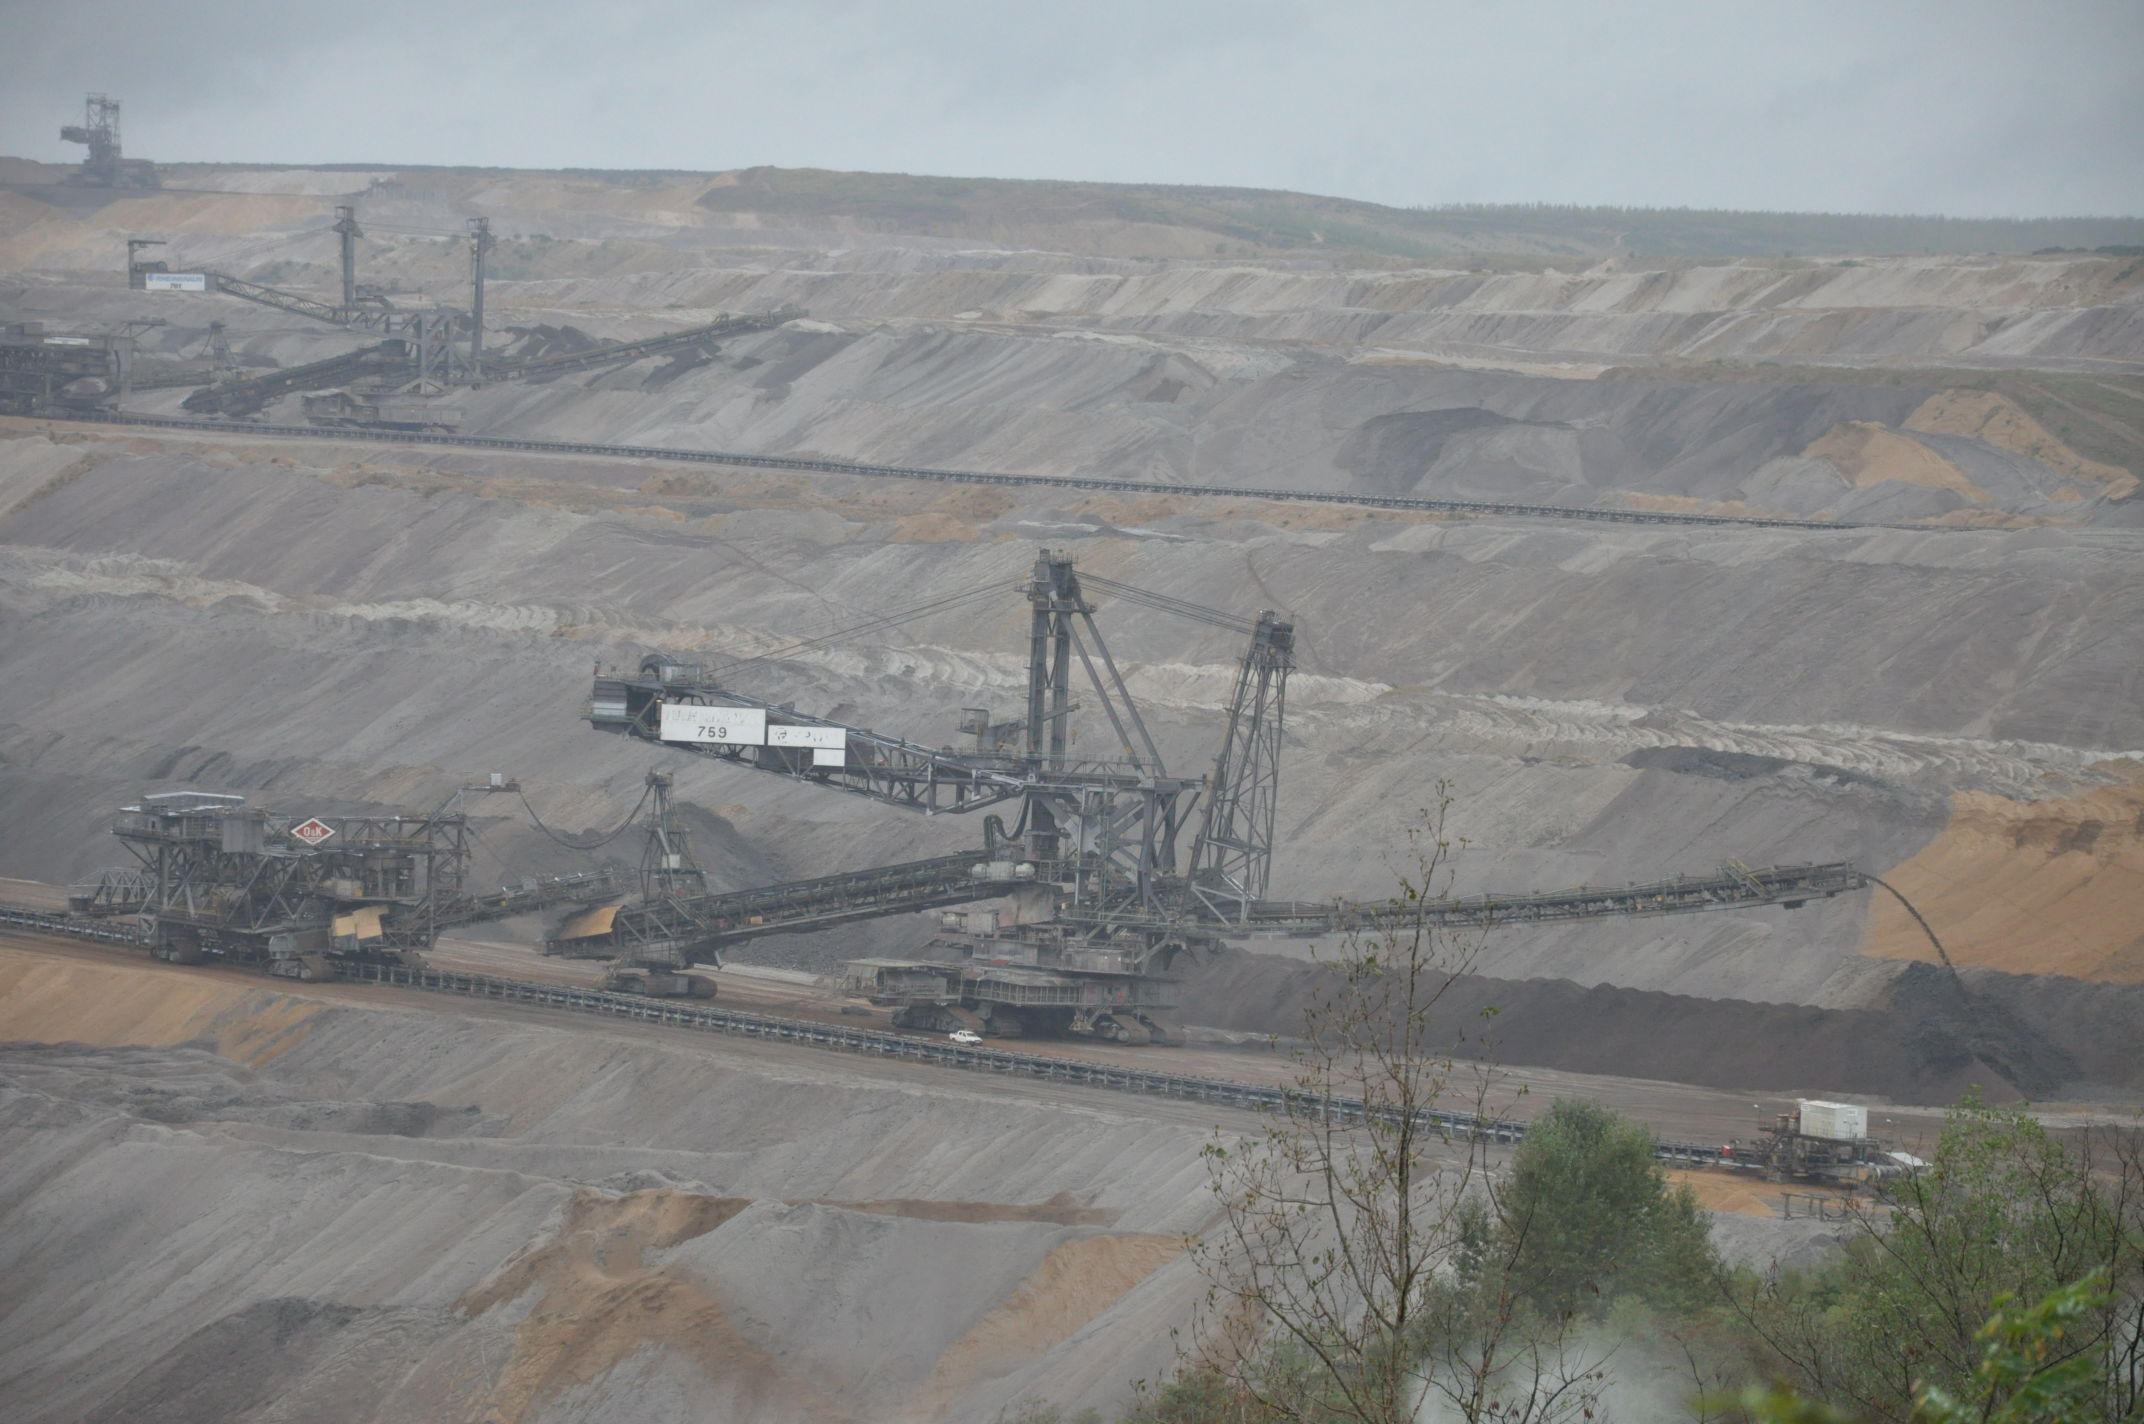 Photo of a spreader in the Hambach lignite surface mine